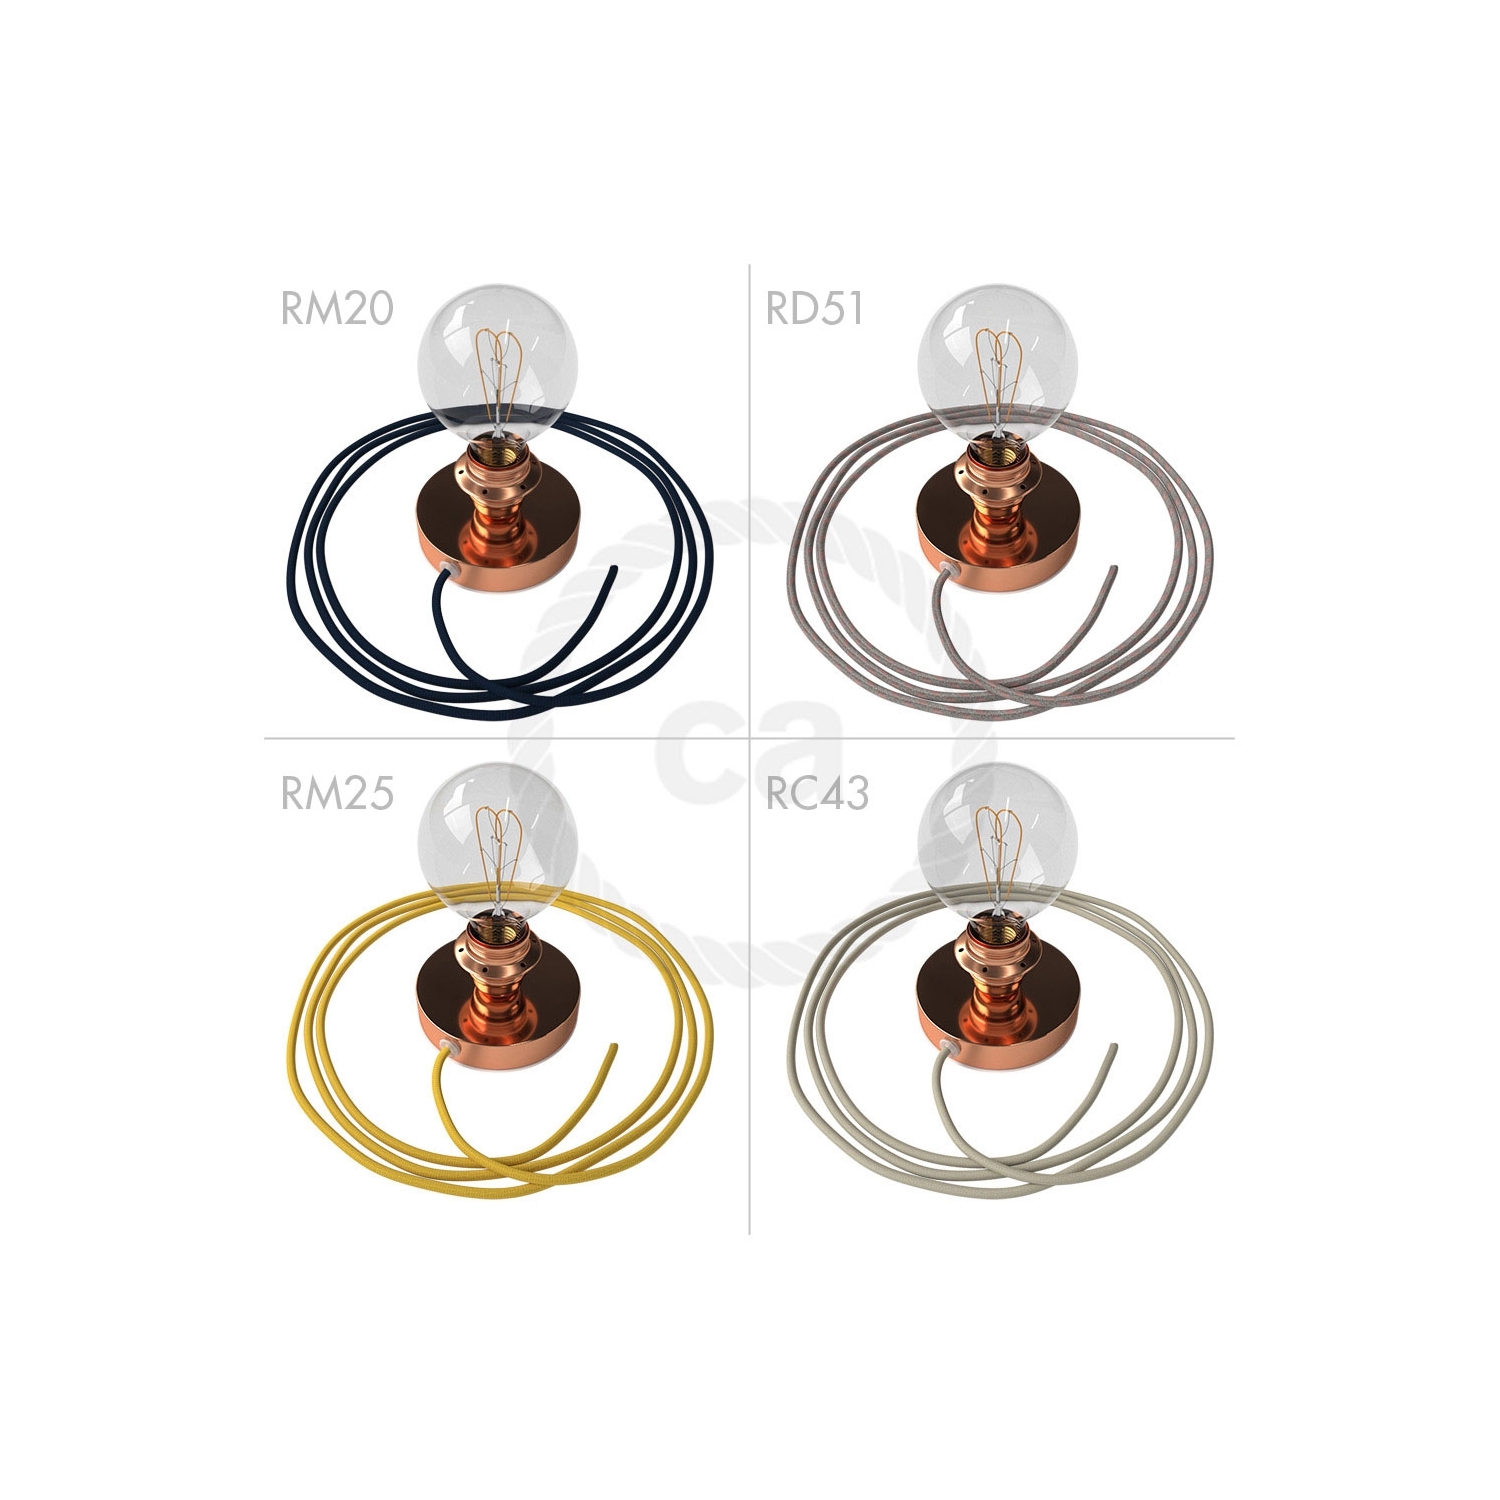 Spostaluce, the coppered metal light source with E26 threaded socket, fabric cable and side holes